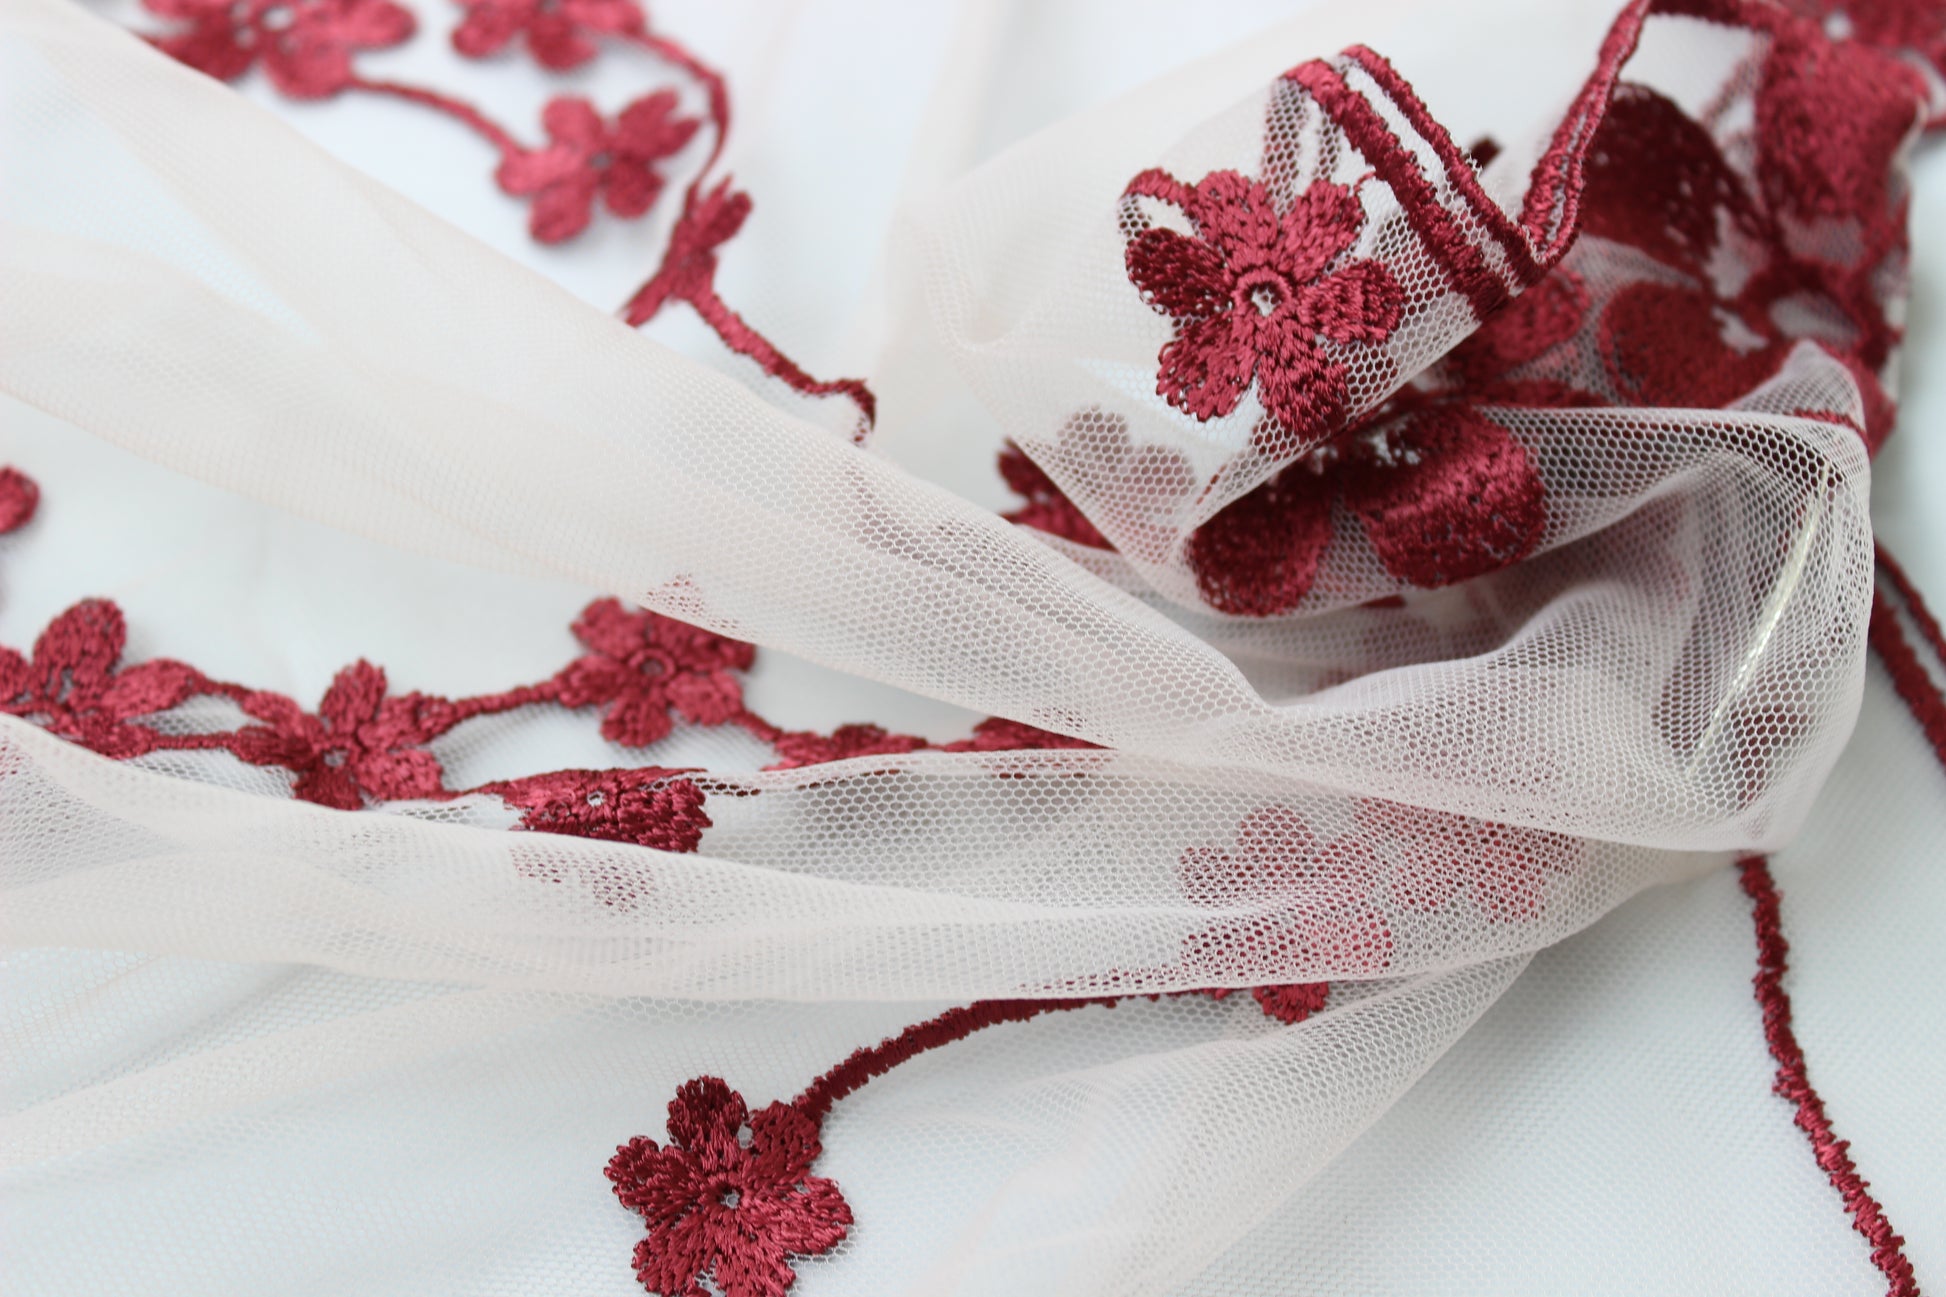 NEW COLOR Bestseller! Dark red lace veil - MariaVeils